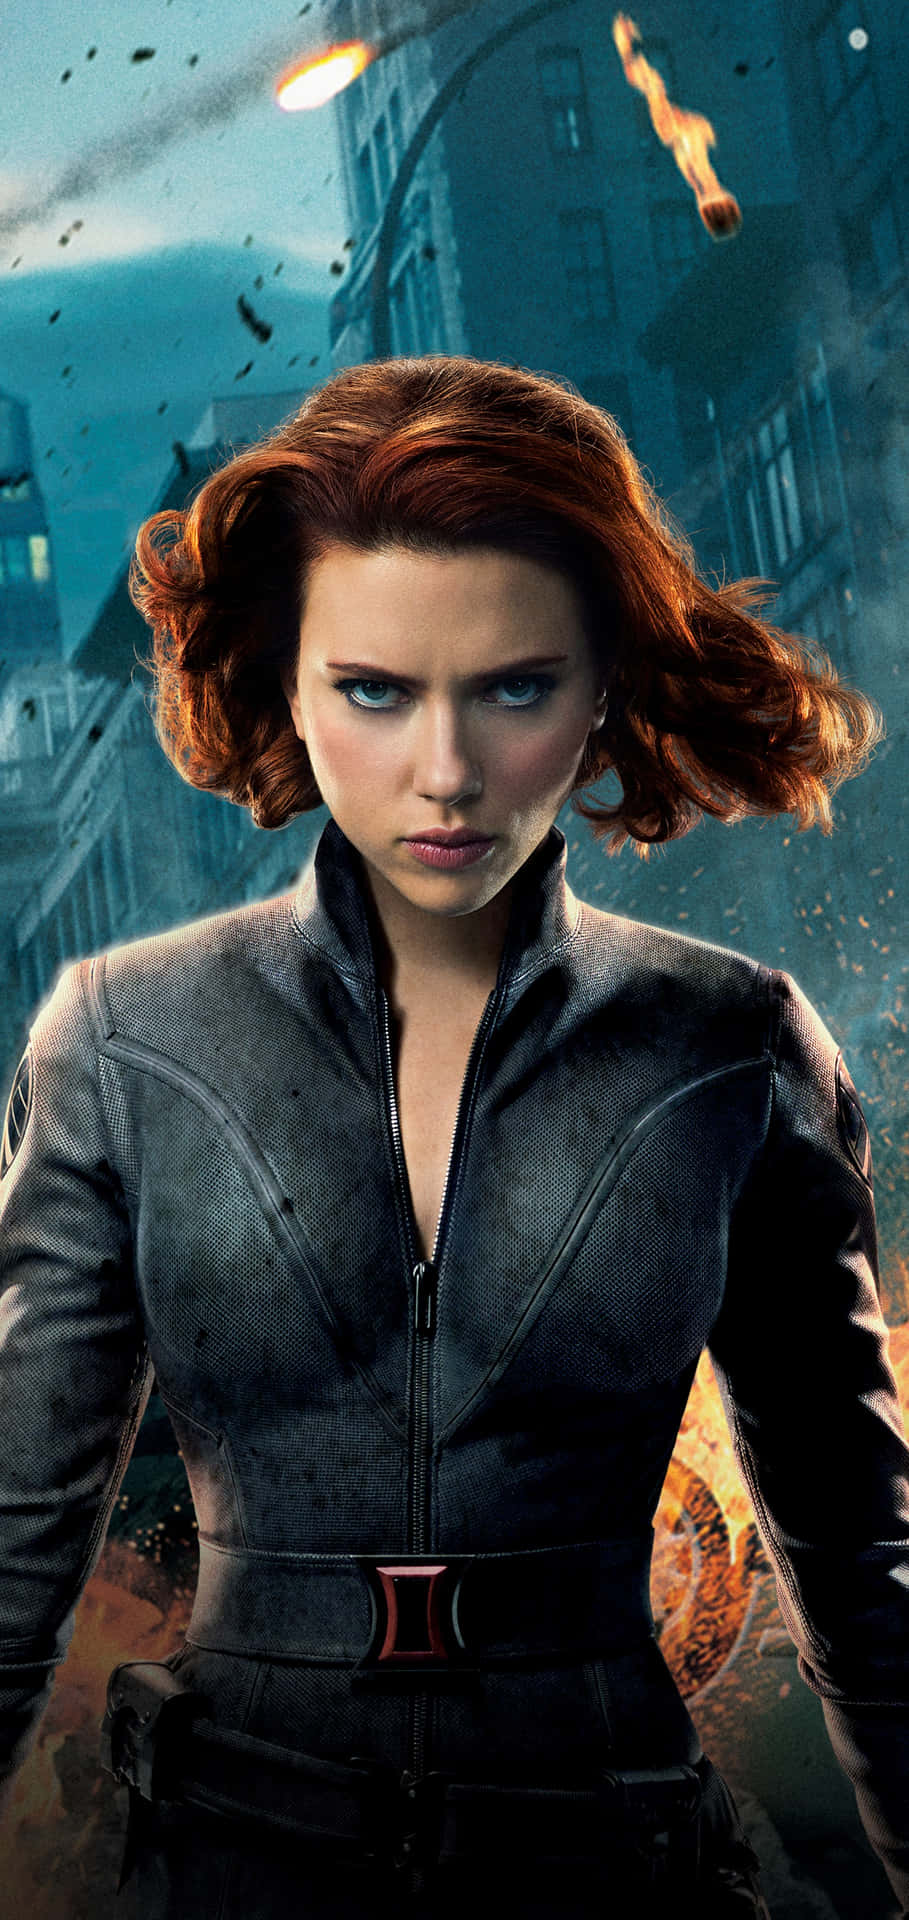 Take your phone game to the next level with the Black Widow Iphone Wallpaper